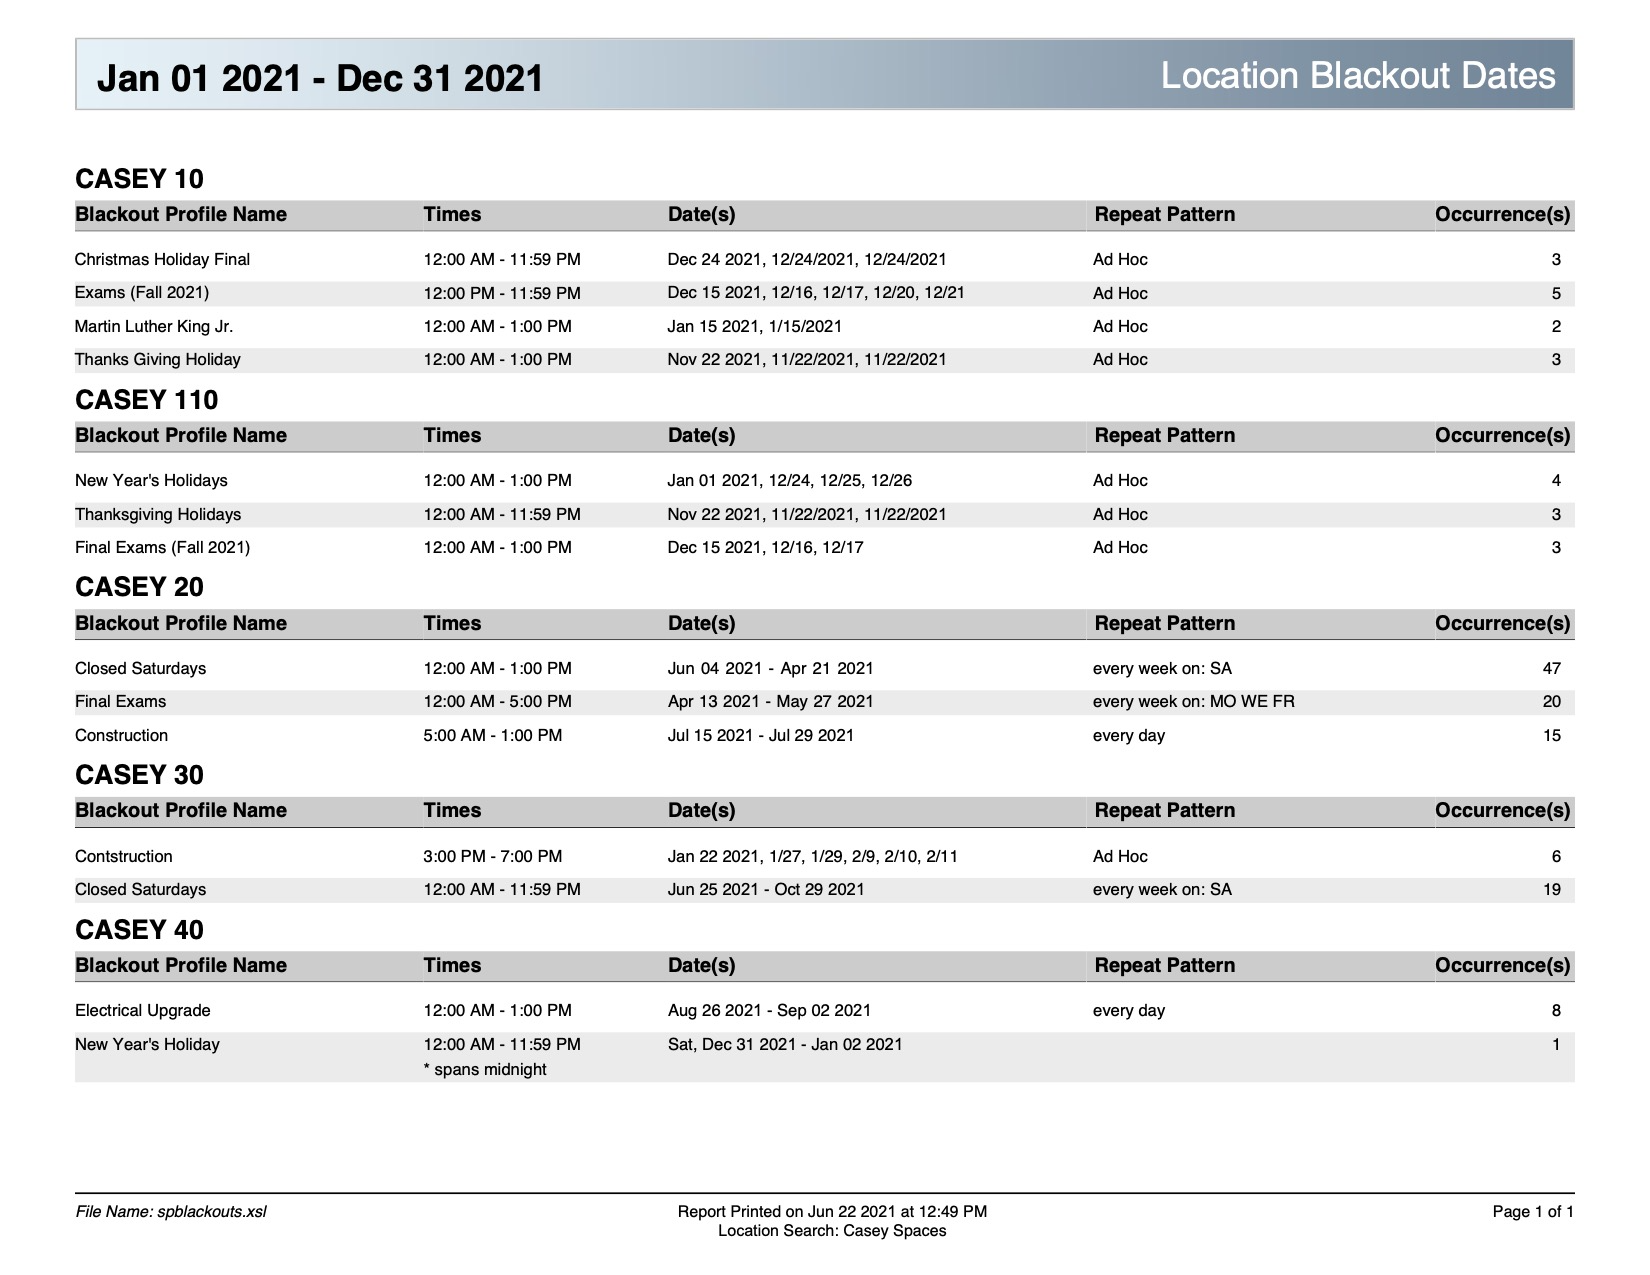 Location blackout dates example